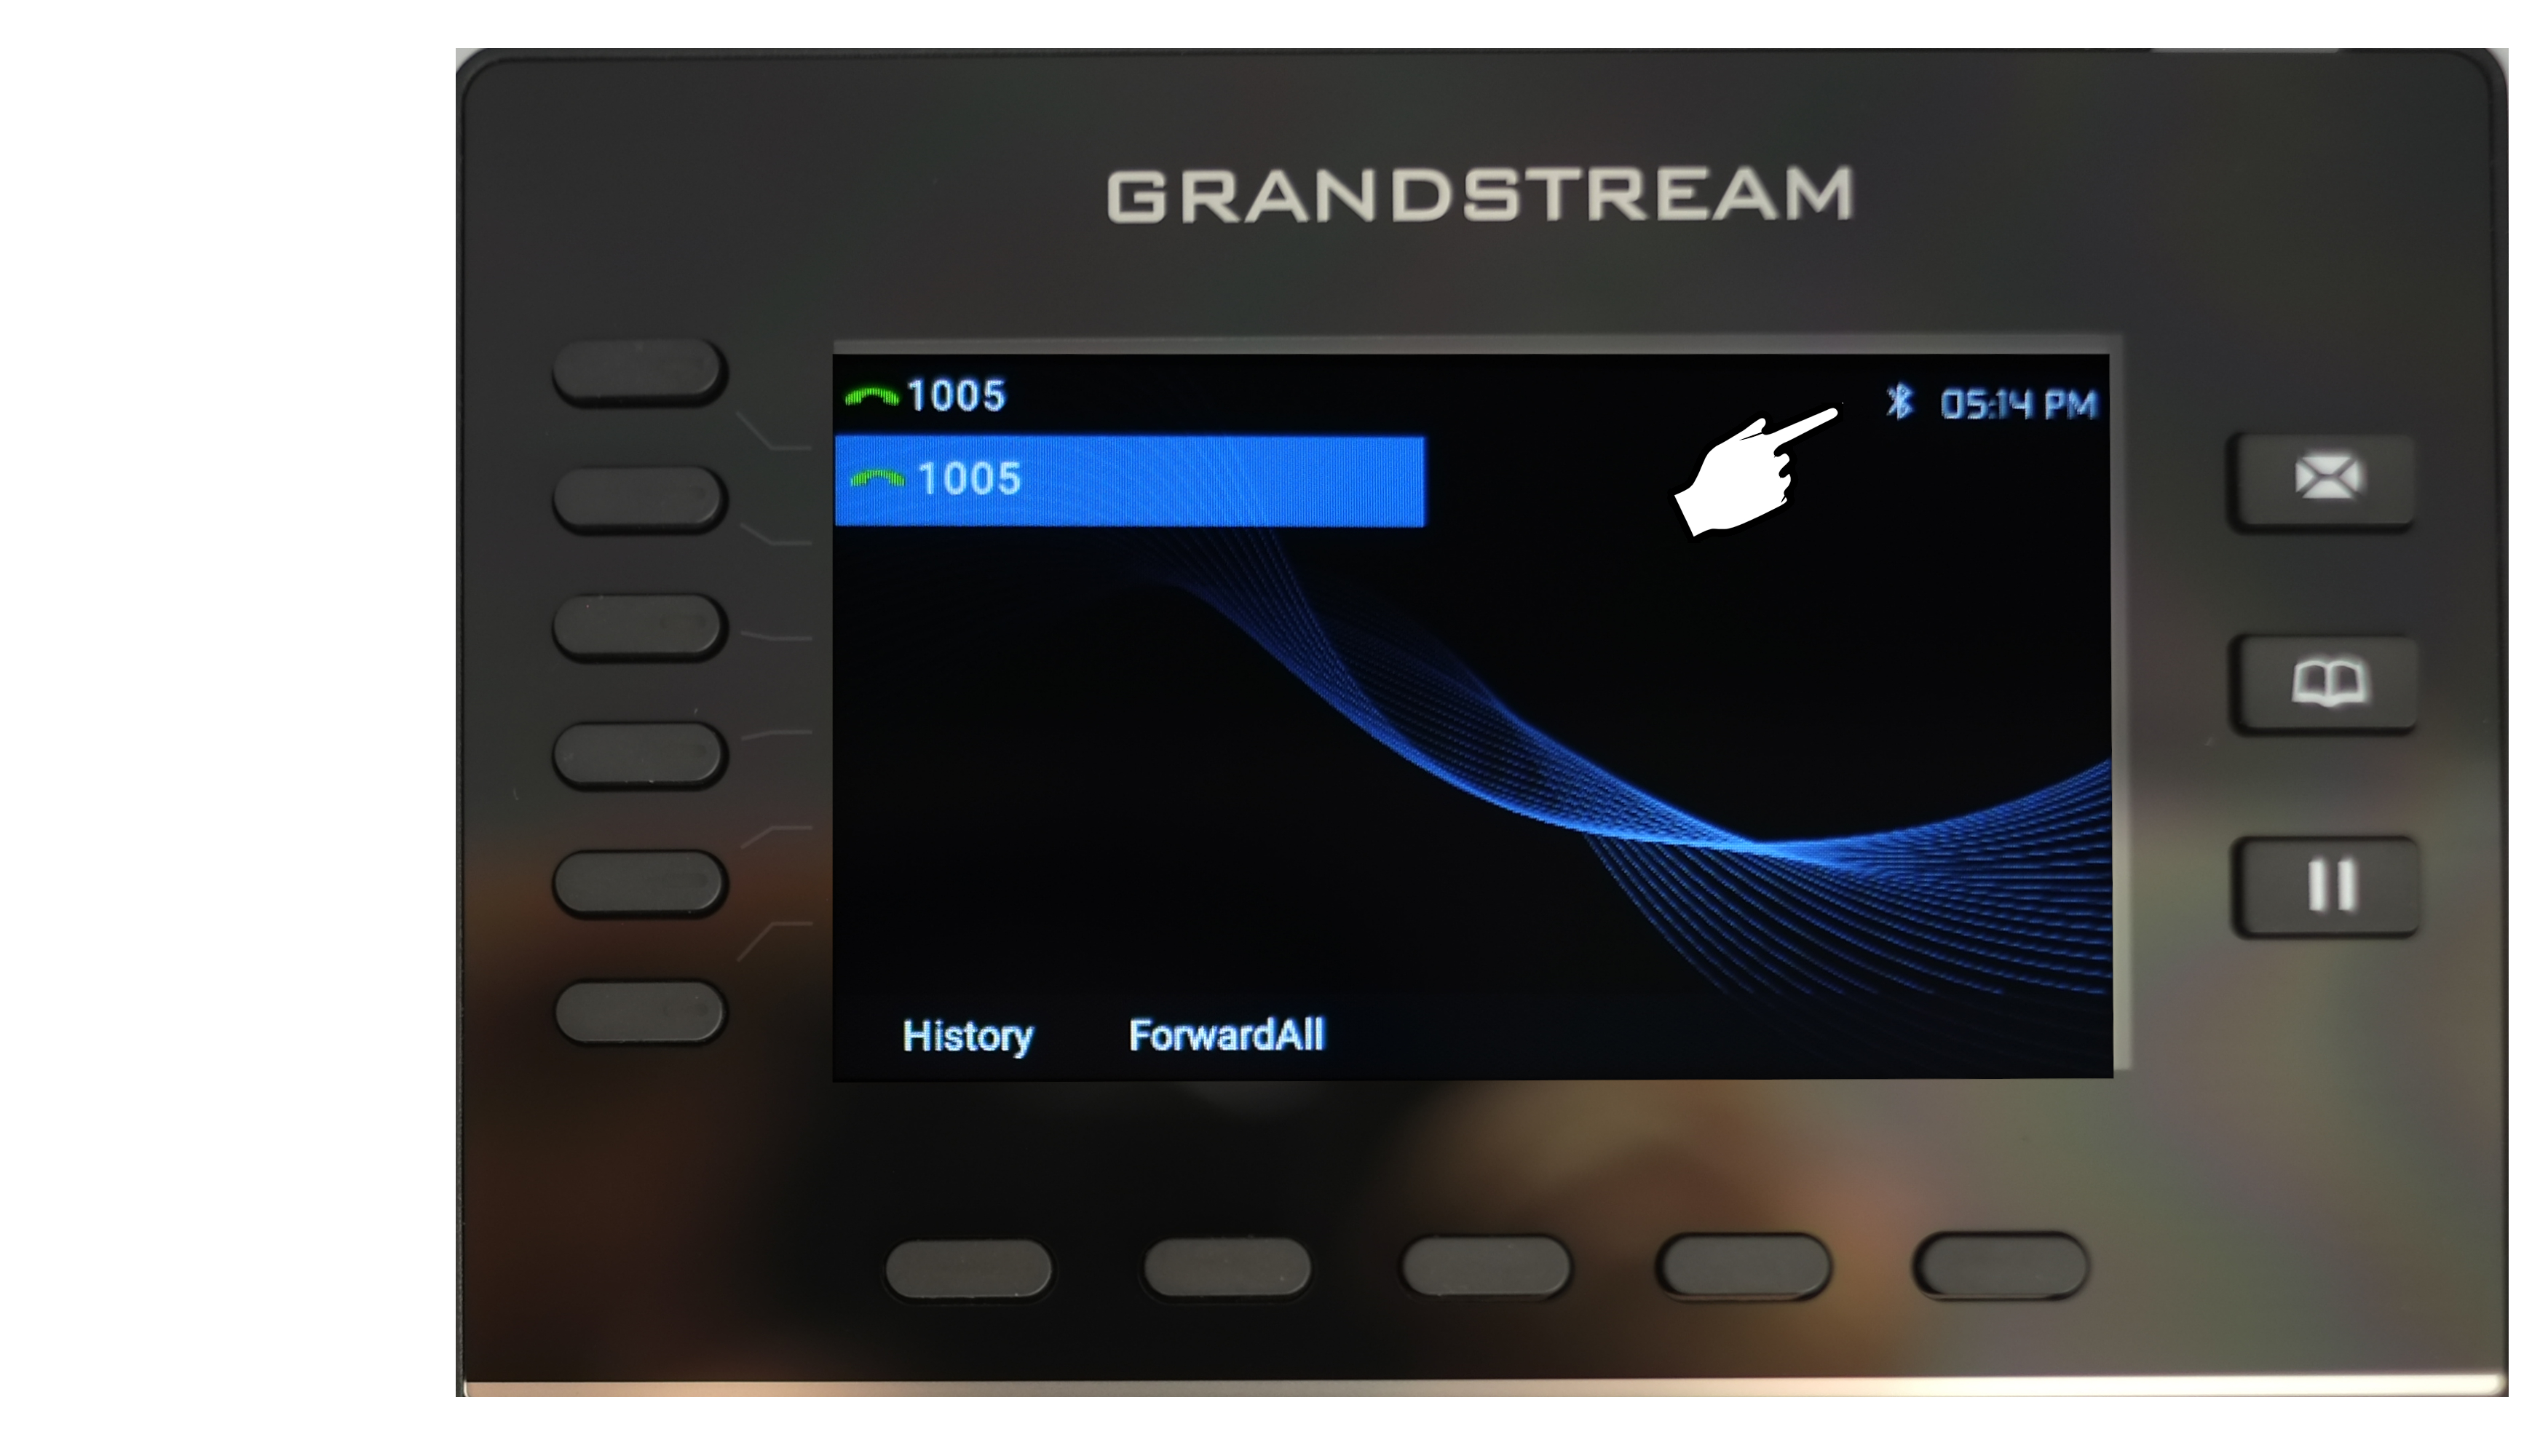 Grandstream phone home screen before Bluetooth device connected